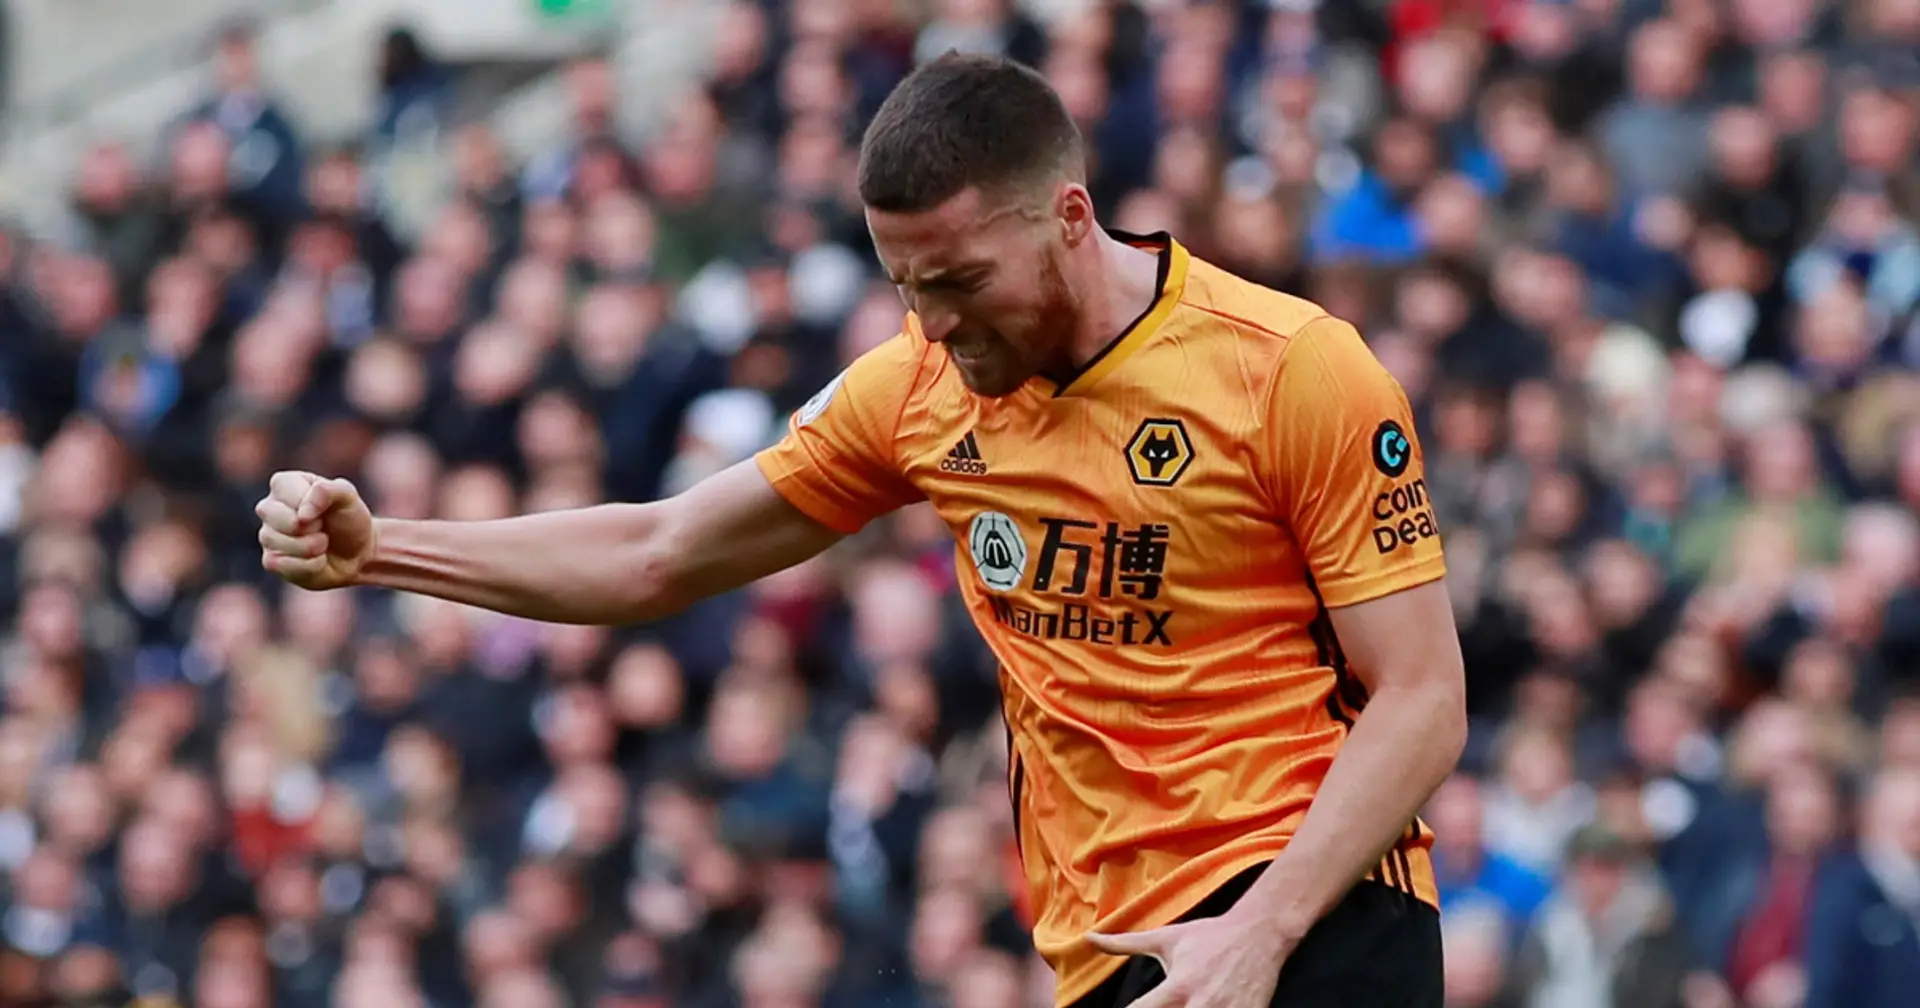 Darren Bent urges Arsenal to sign Matt Doherty: 'He has got all the attributes of a modern-day fullback'